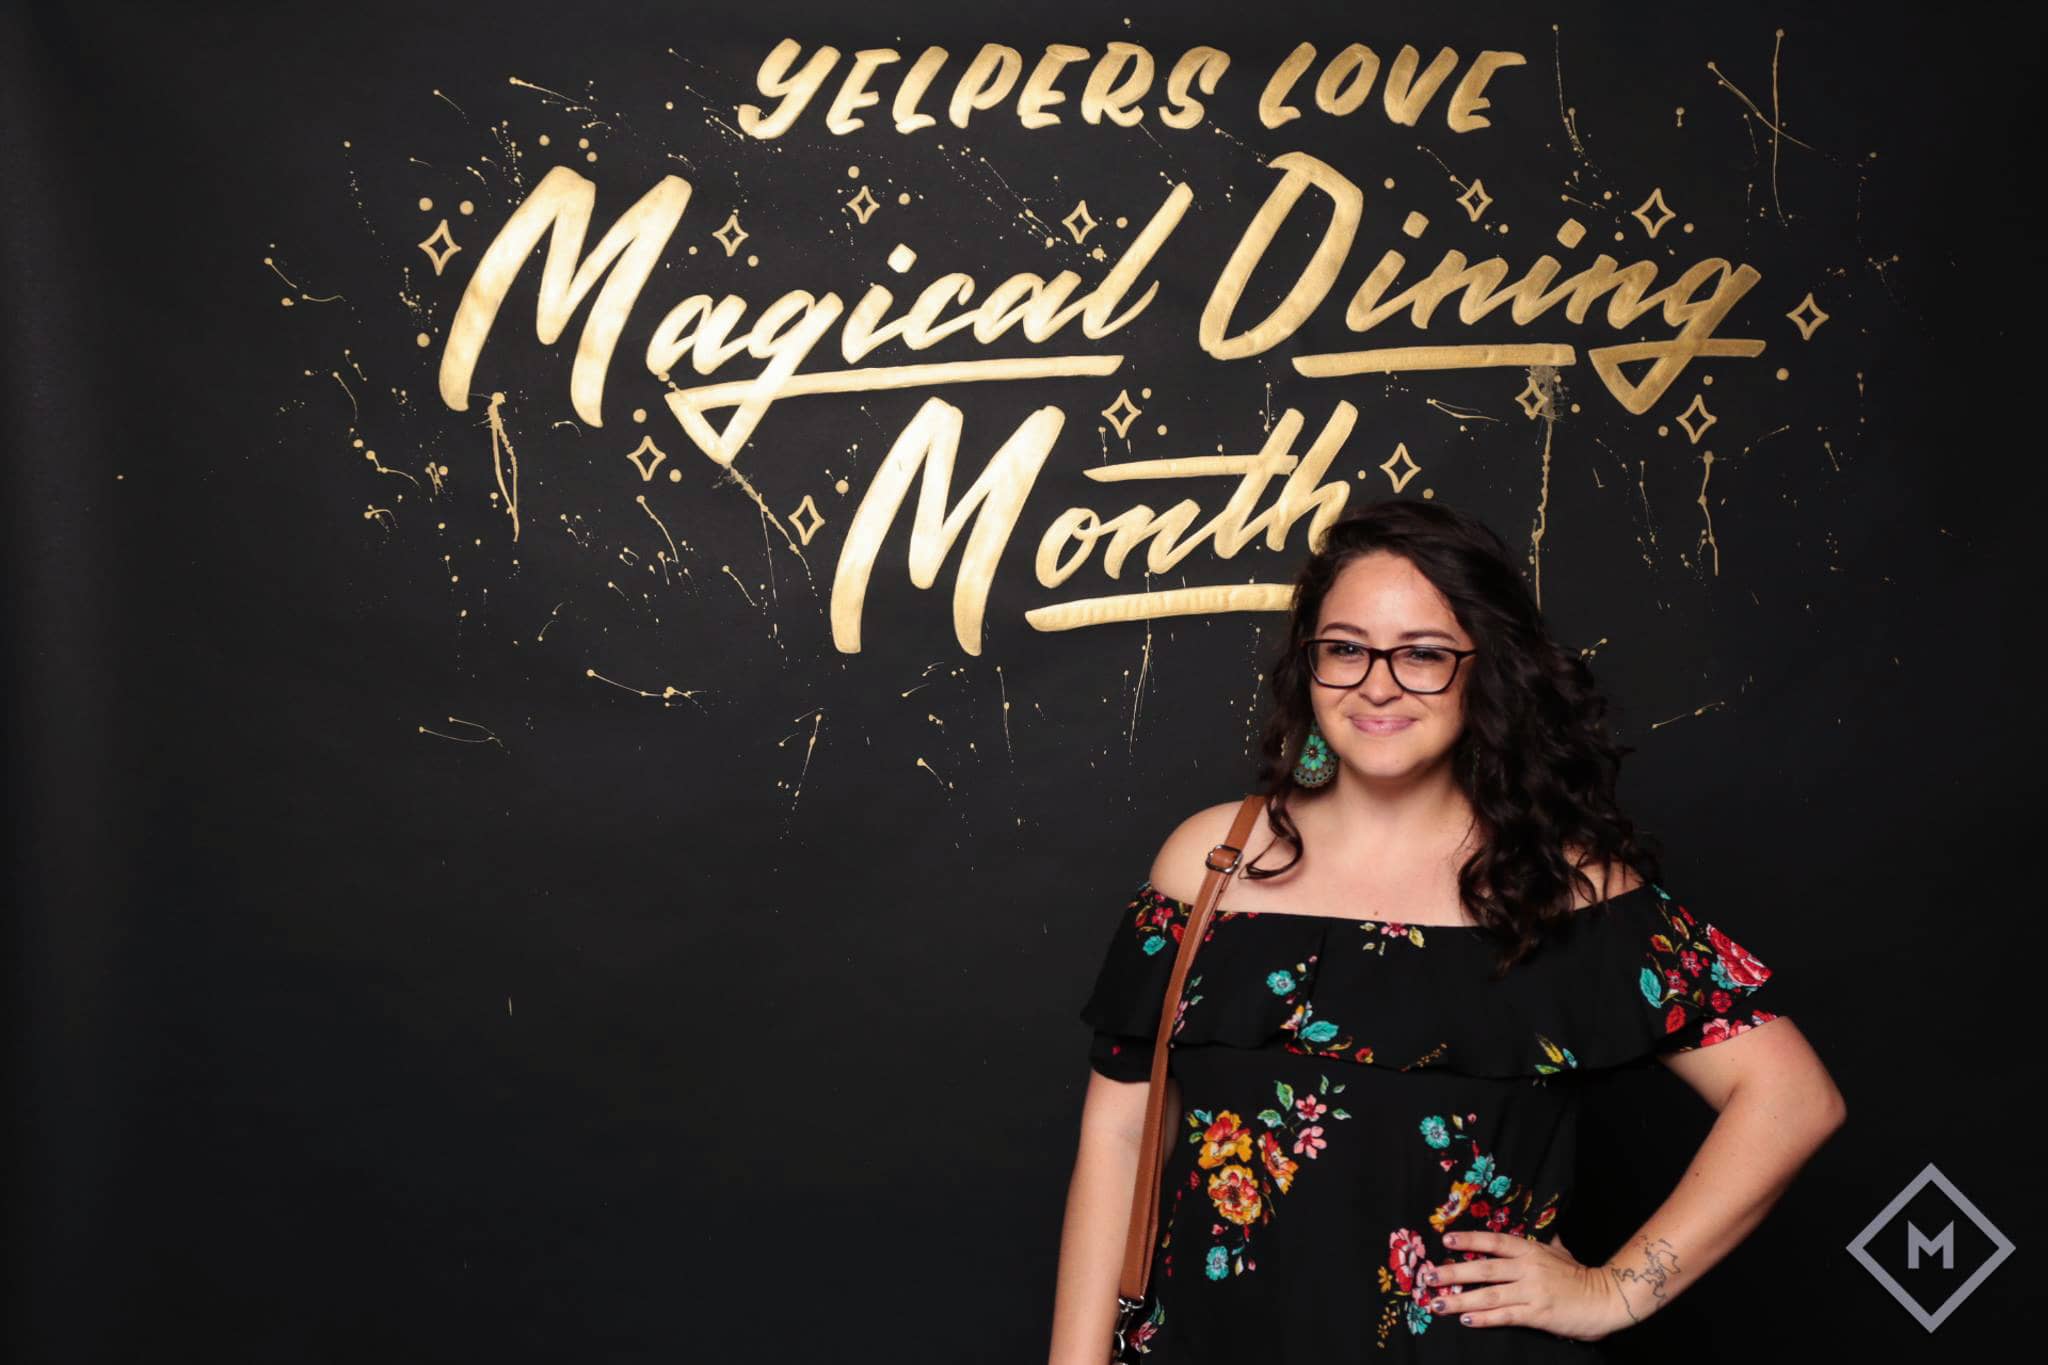 Yelp Magical Dining Month hand lettering by Hillery Powers photo backdrop in Millenia Mall